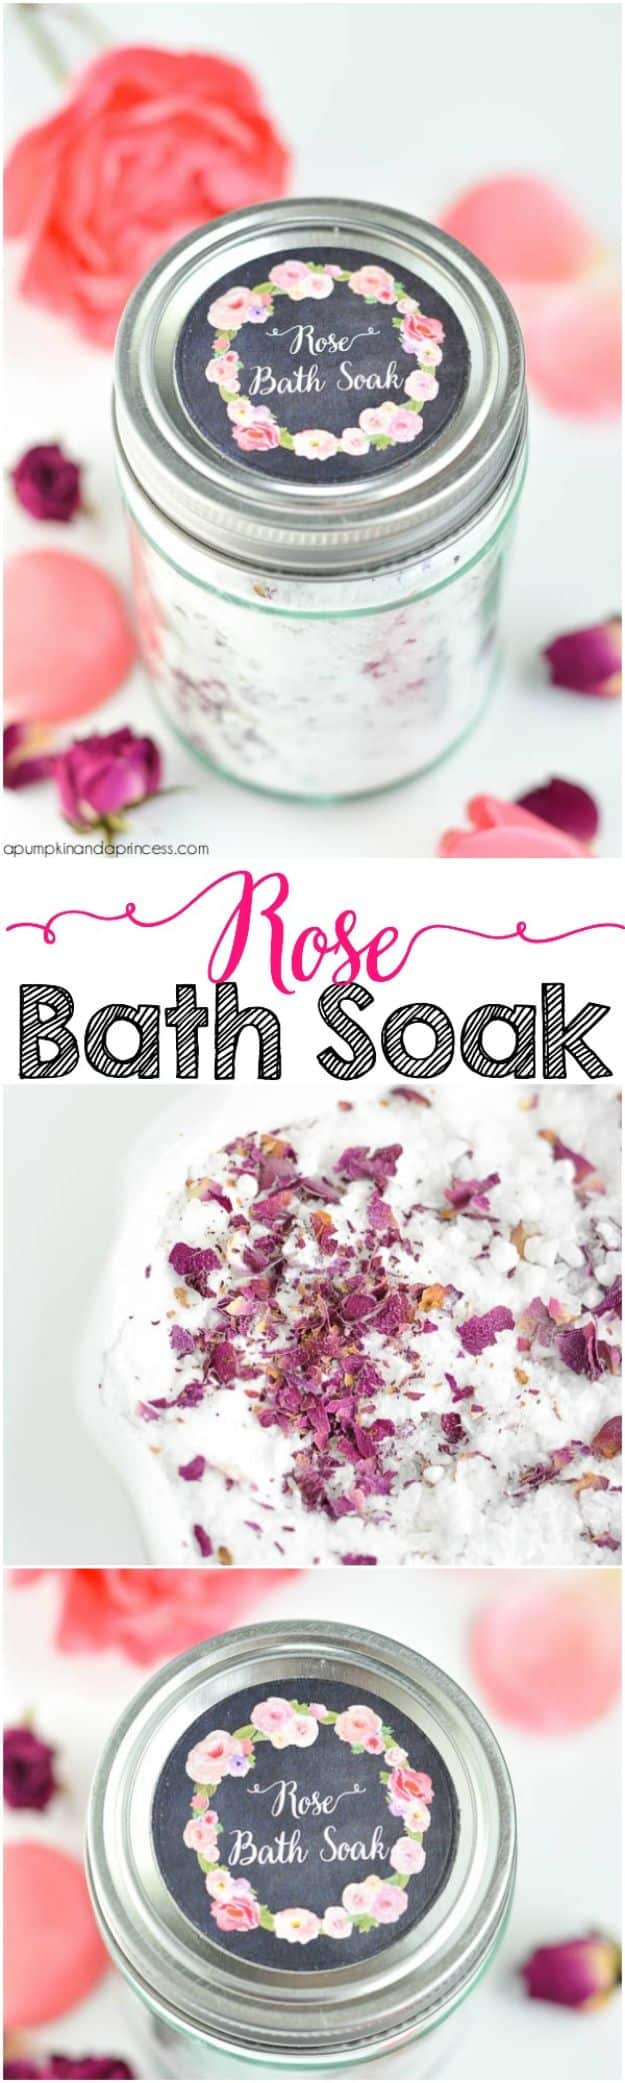 Rose Crafts - Rose Petal Bath Soak - Easy Craft Projects With Roses - Paper Flowers, Quilt Patterns, DIY Rose Art for Kids - Dried and Real Roses for Wall Art and Do It Yourself Home Decor - Mothers Day Gift Ideas - Fake Rose Arrangements That Look Amazing - Cute Centerrpieces and Crafty DIY Gifts With A Rose http://diyjoy.com/rose-crafts